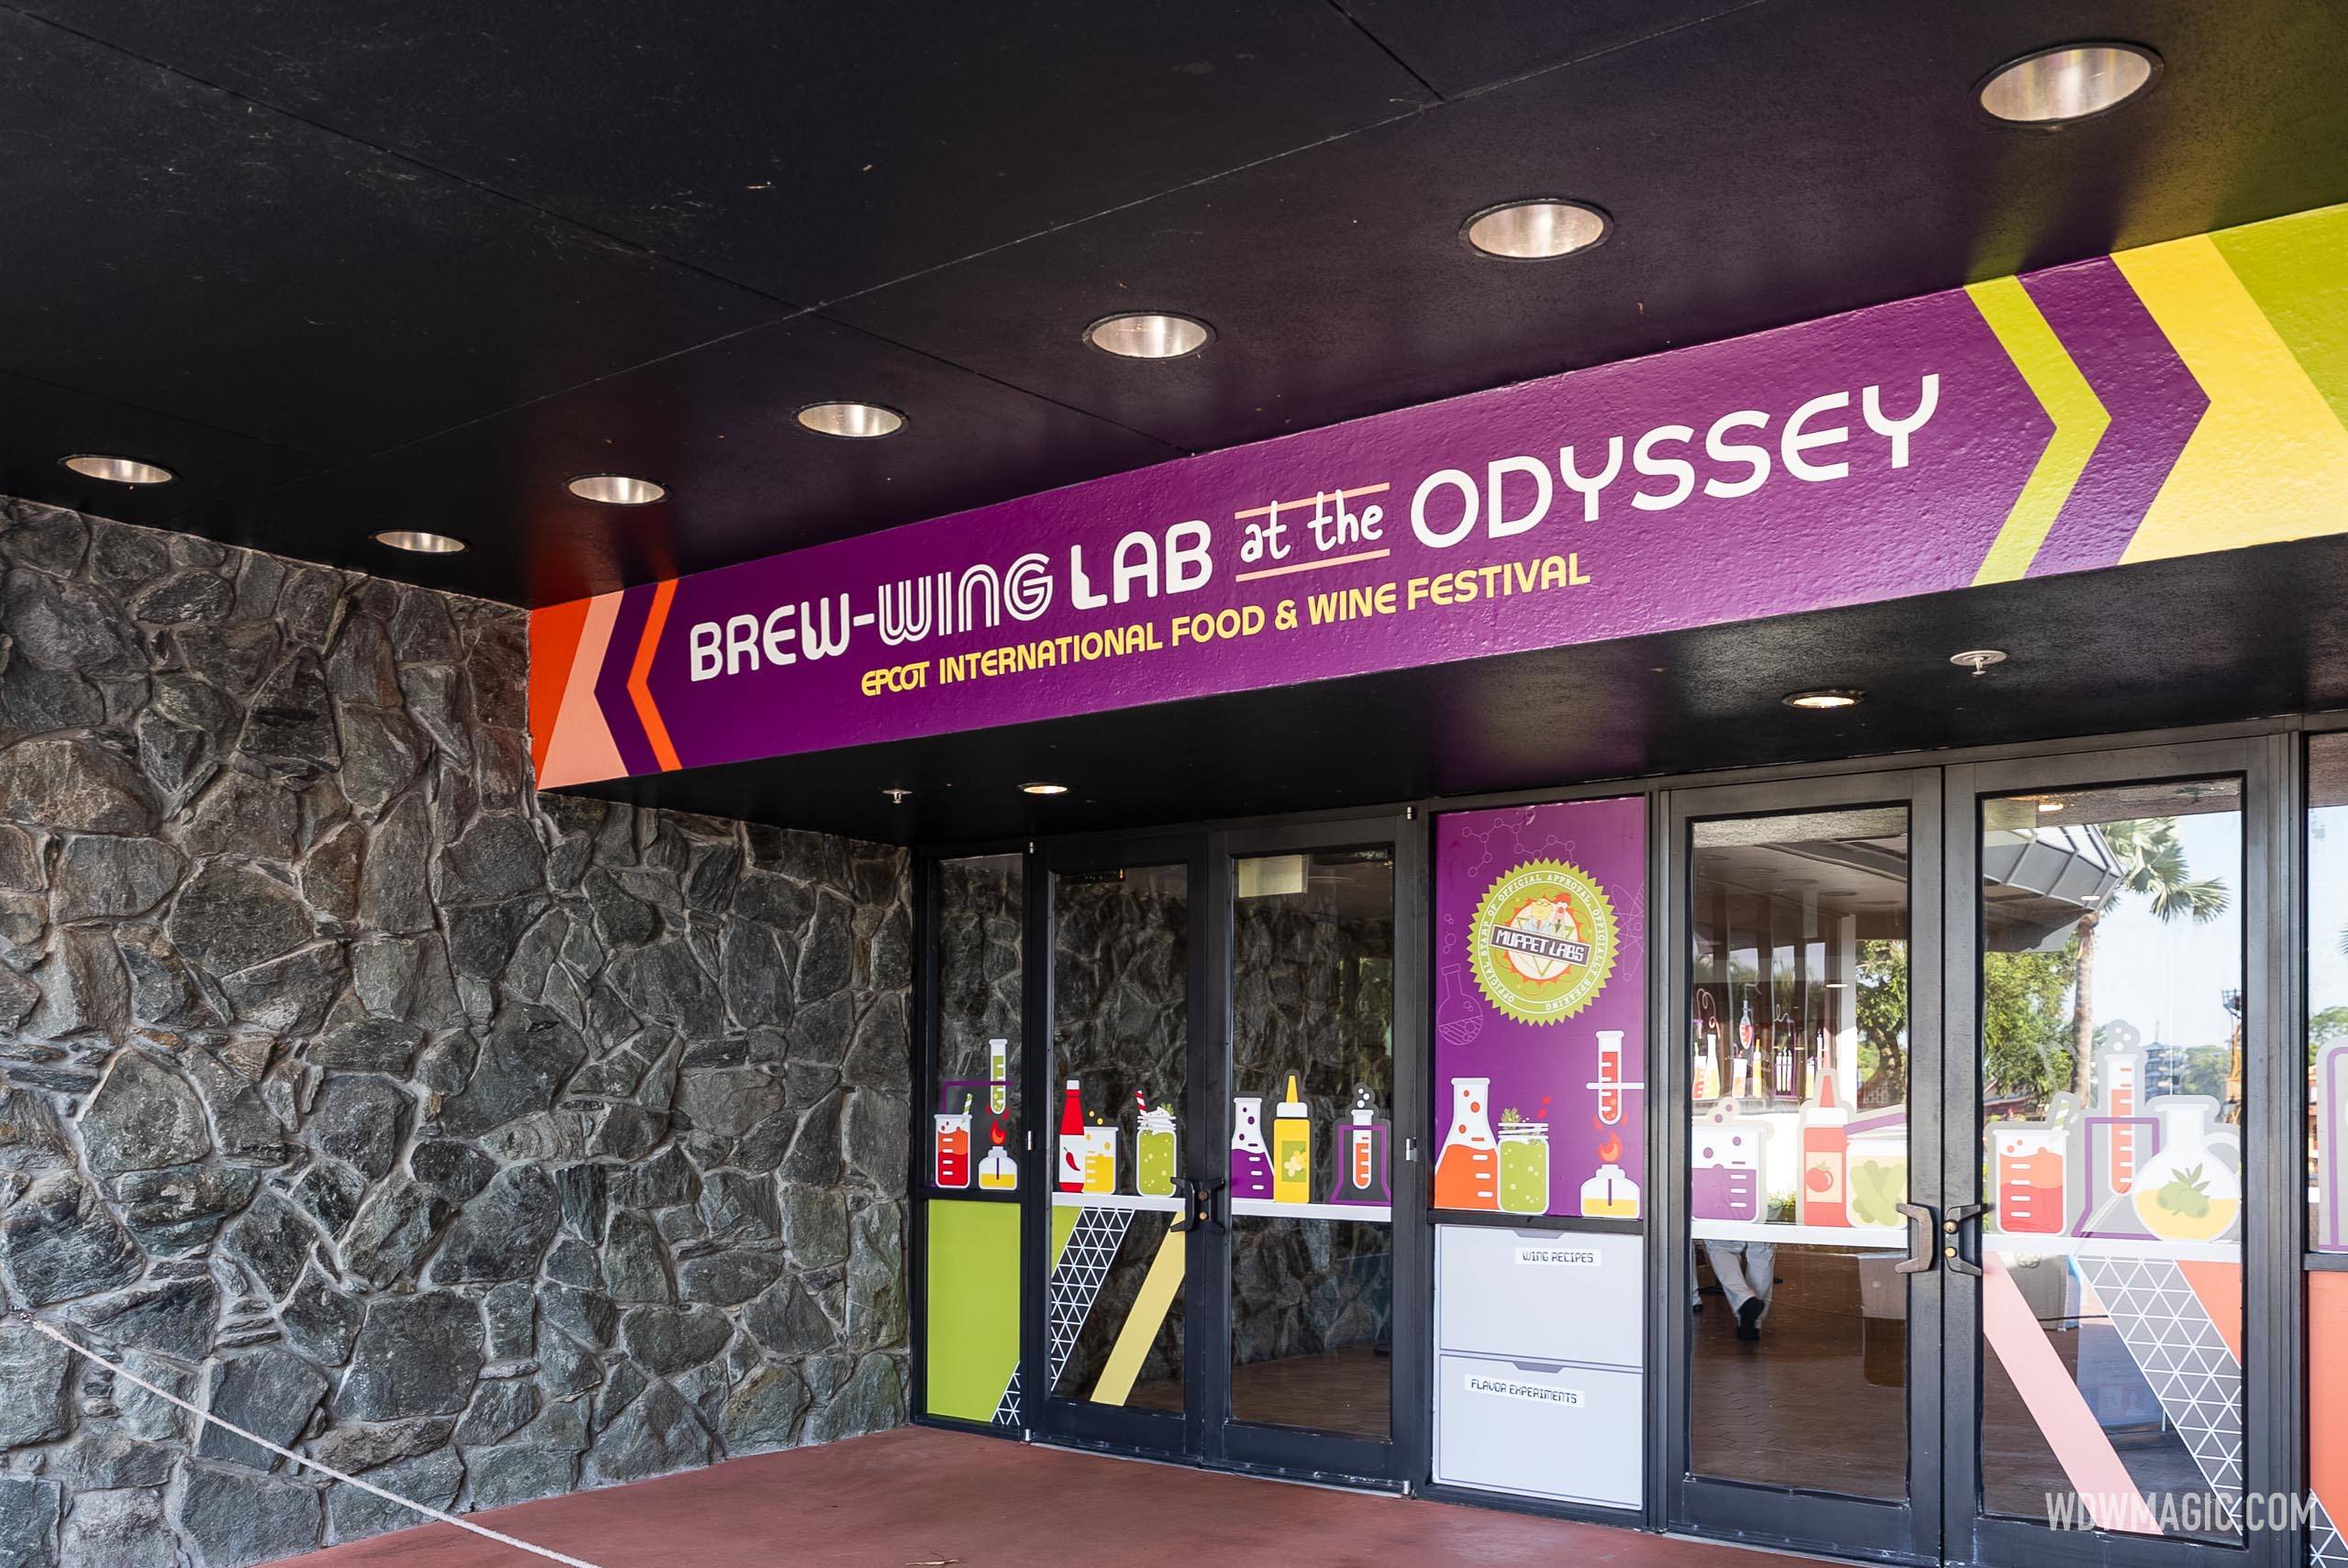 Brew-Wing Lab at the Odyssey